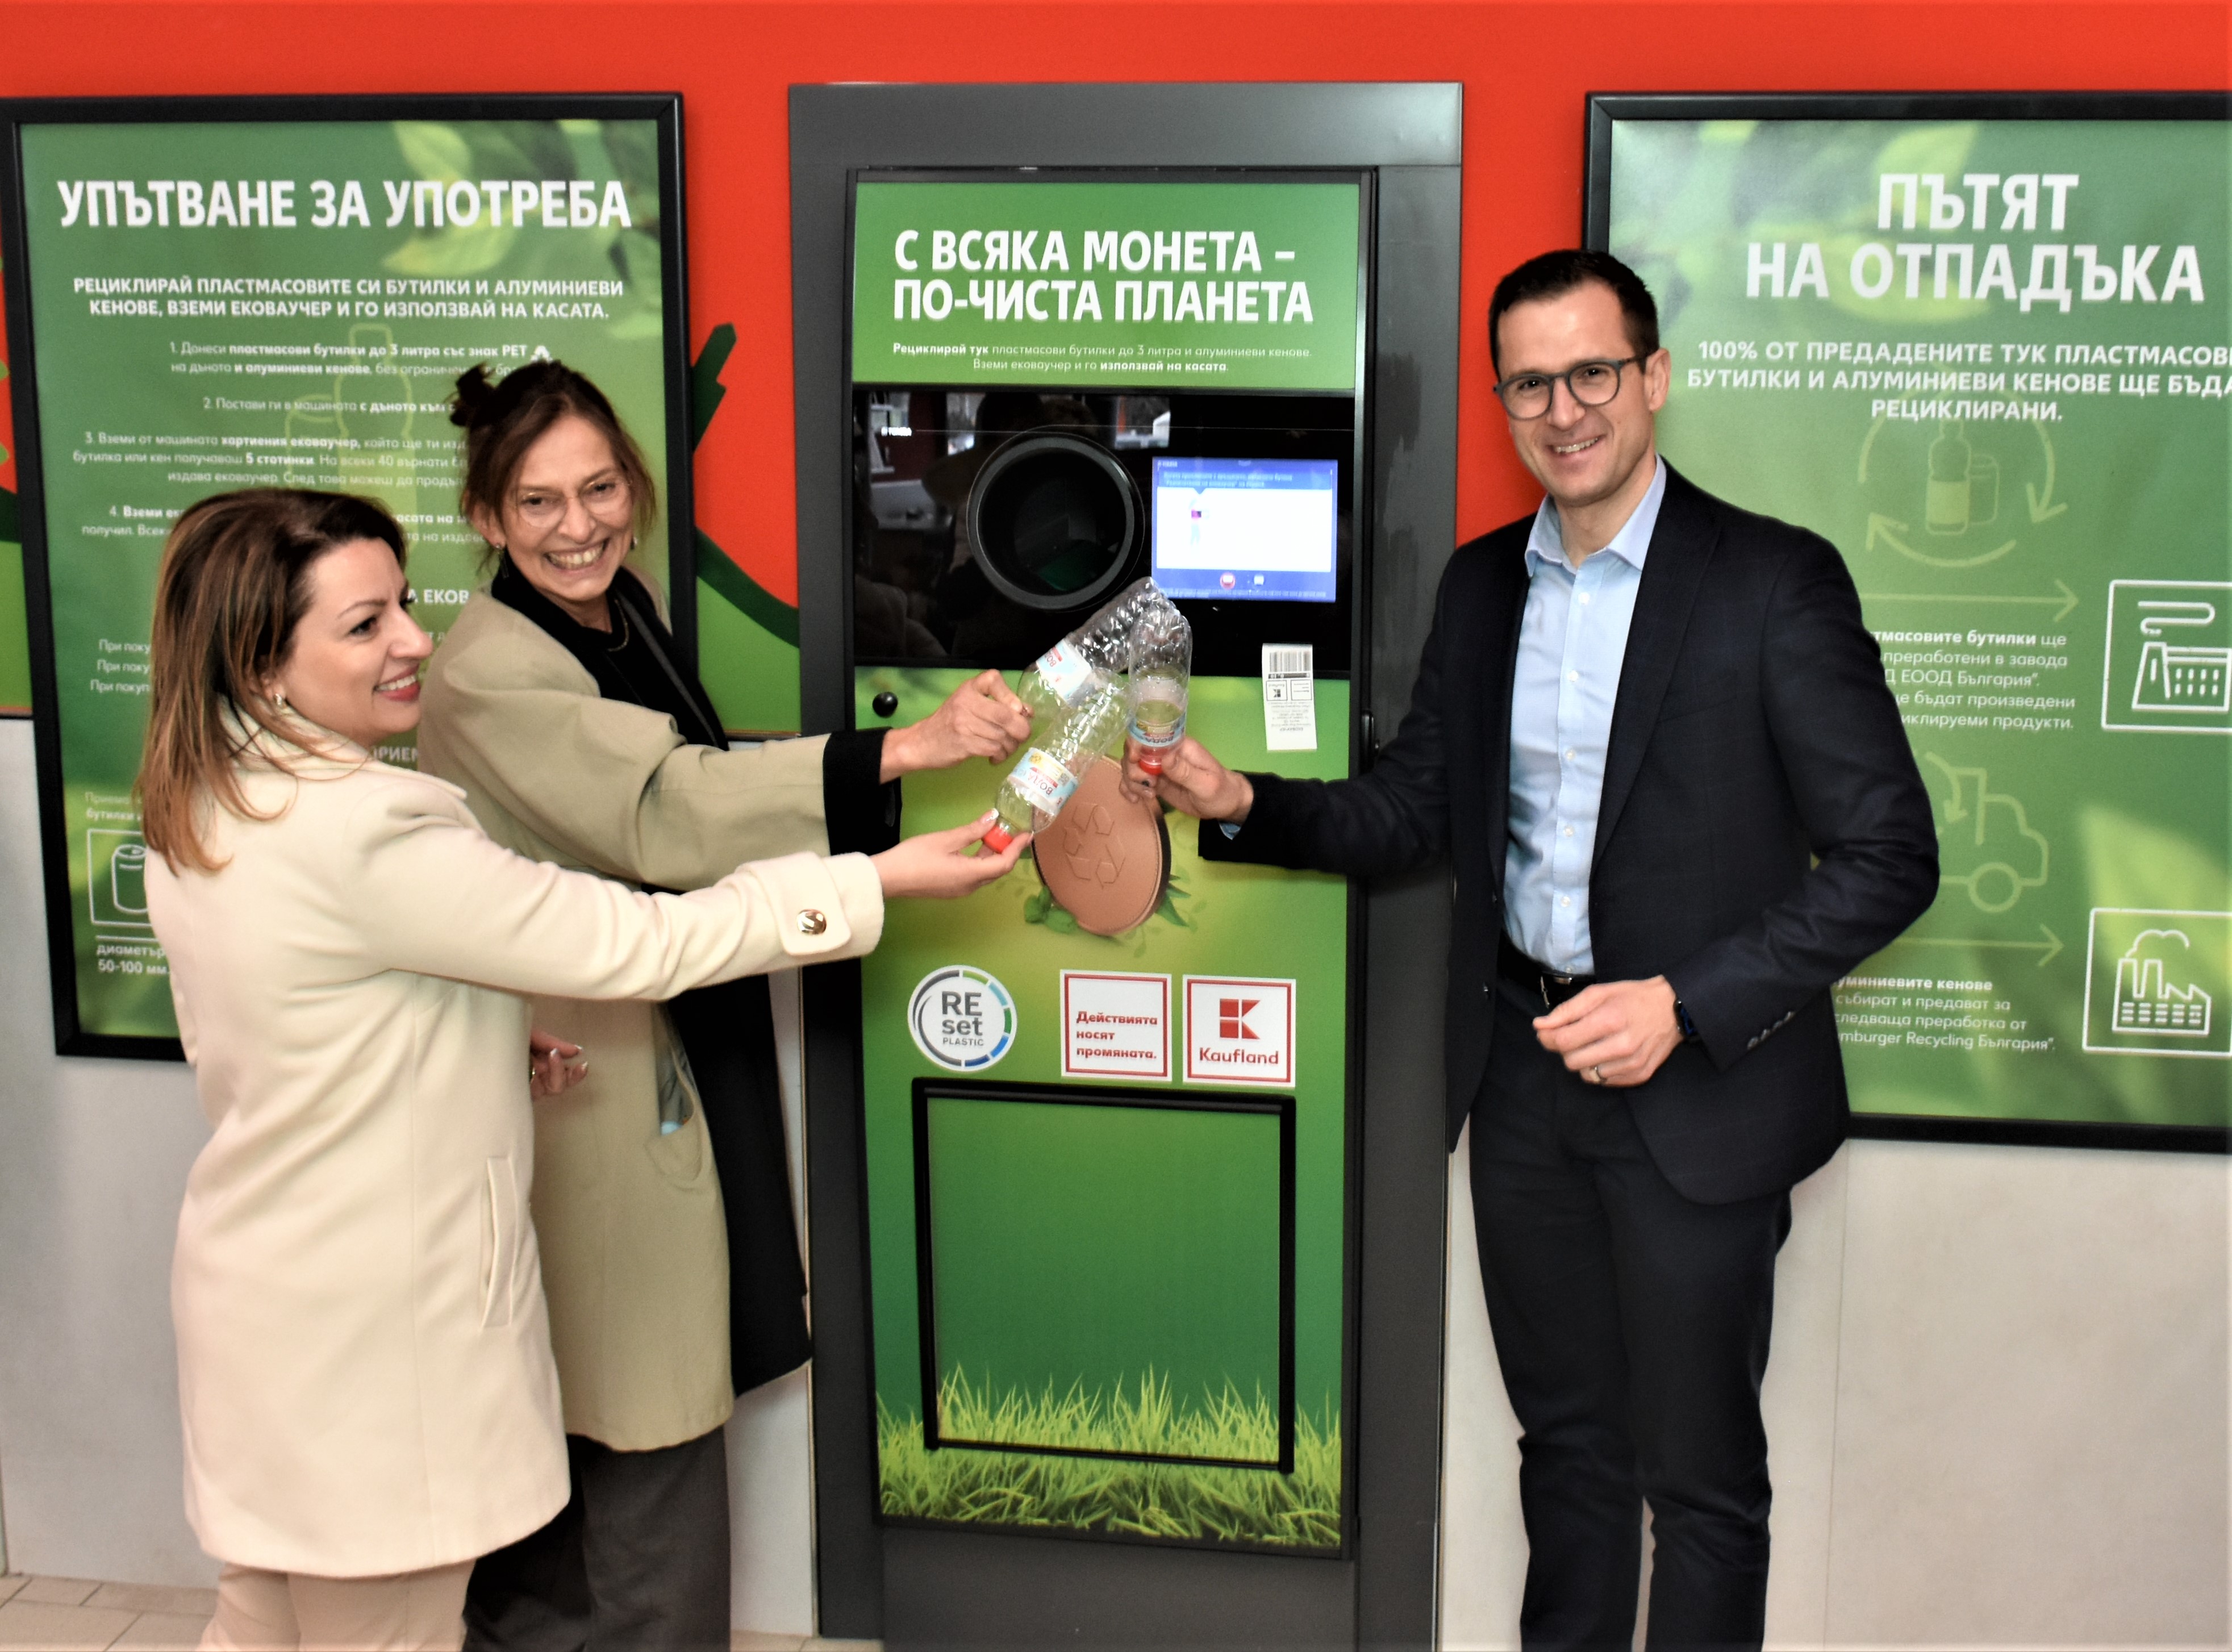 KAUFLAND AND LIDL INTRODUCE THE FIRST MACHINES FOR THE SEPARATE COLLECTION OF PLASTIC BOTTLES AND CANS